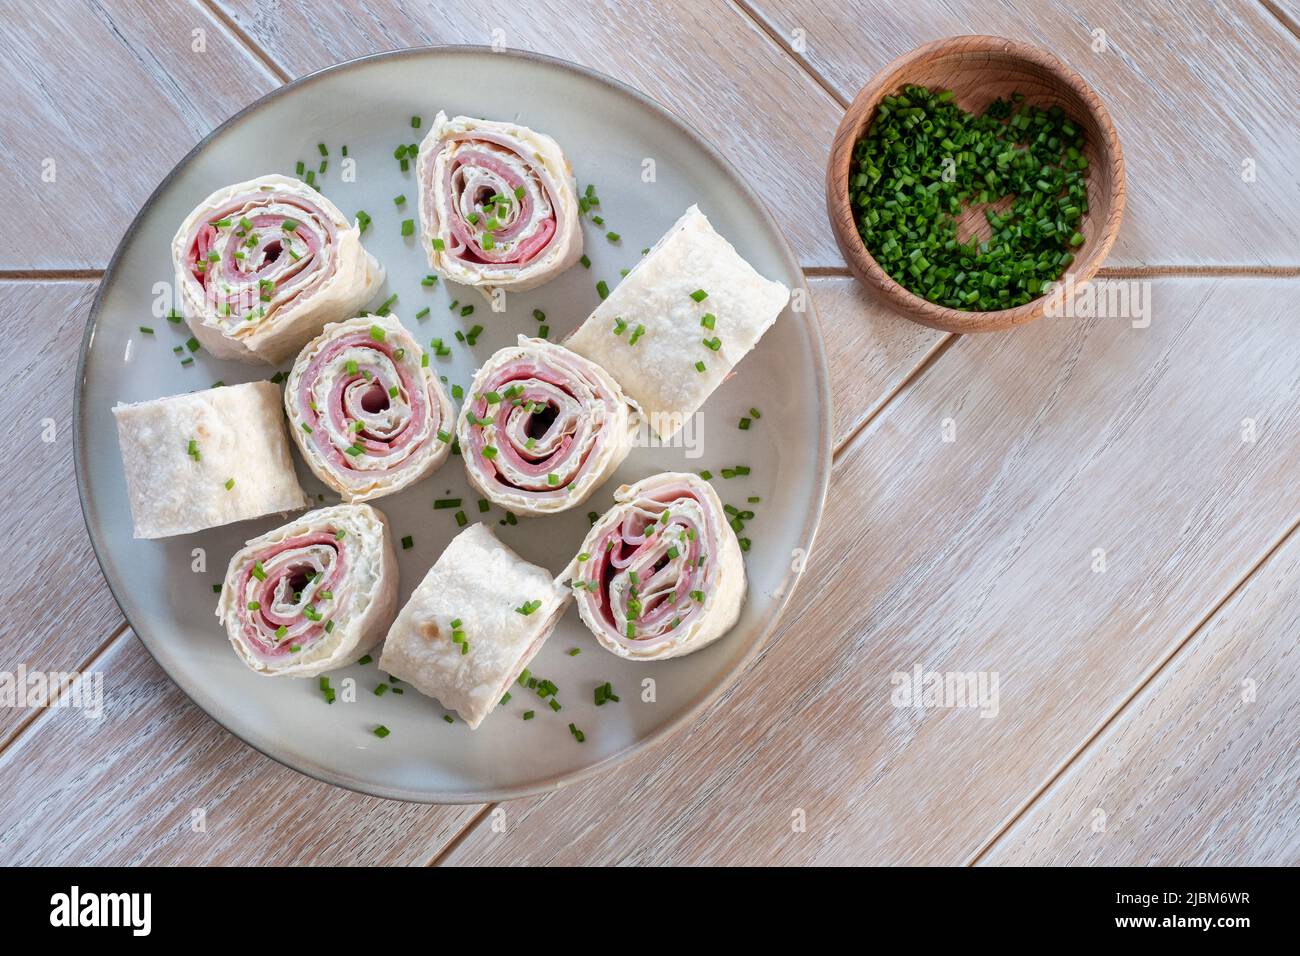 Ham and cream cheese rolled up in a flour tortilla Stock Photo